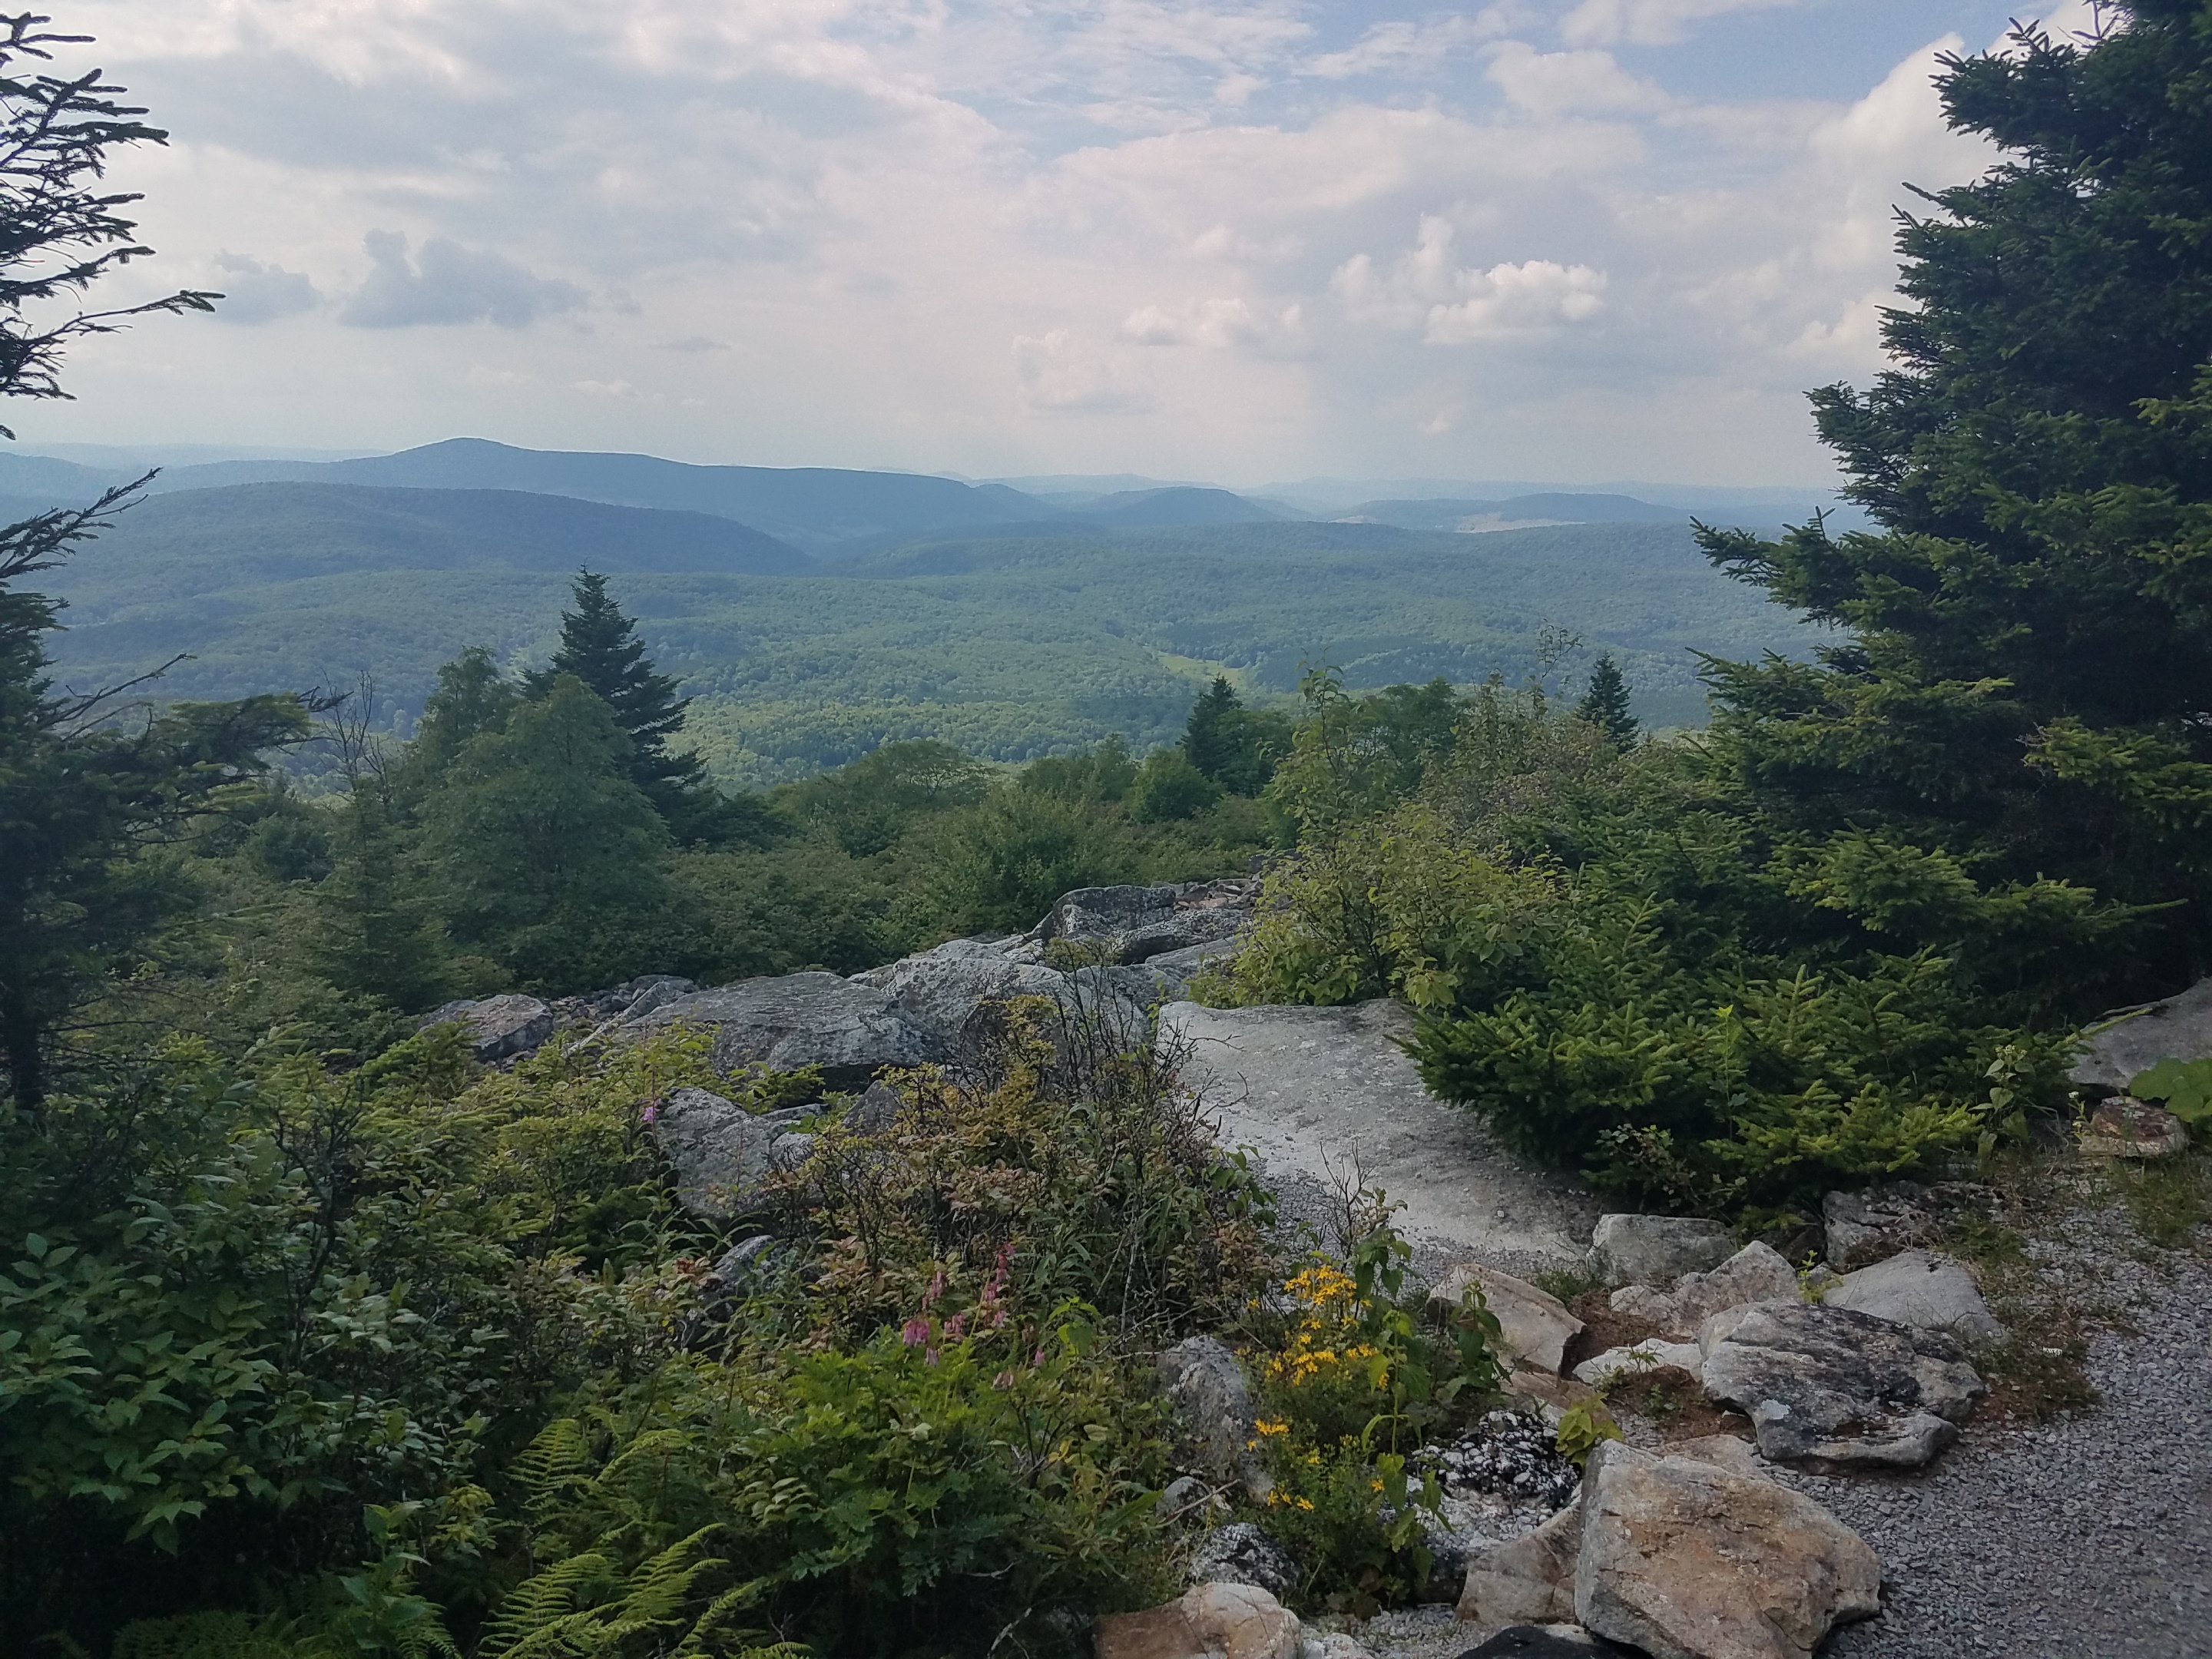 View from atop Spruce Knob, the tallest mountain in West Virginia